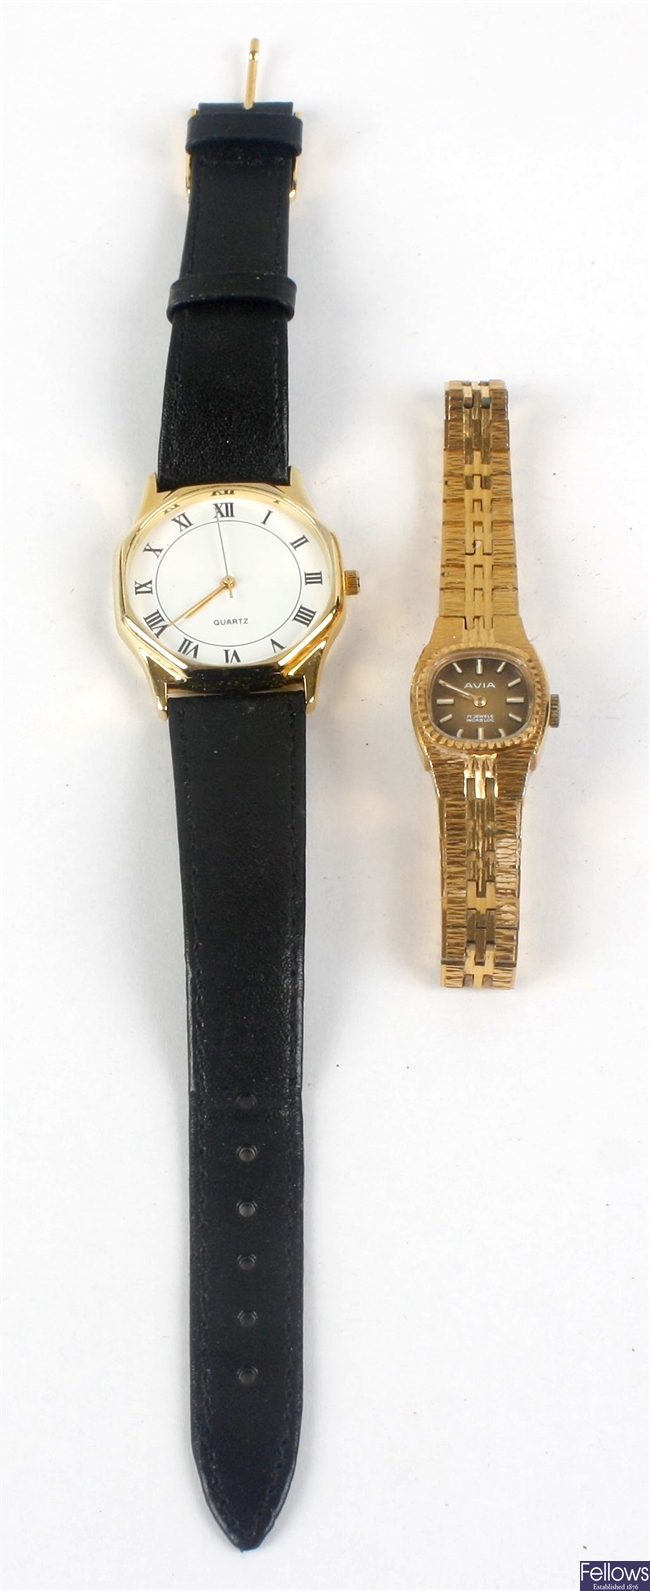 A bag of various watches.